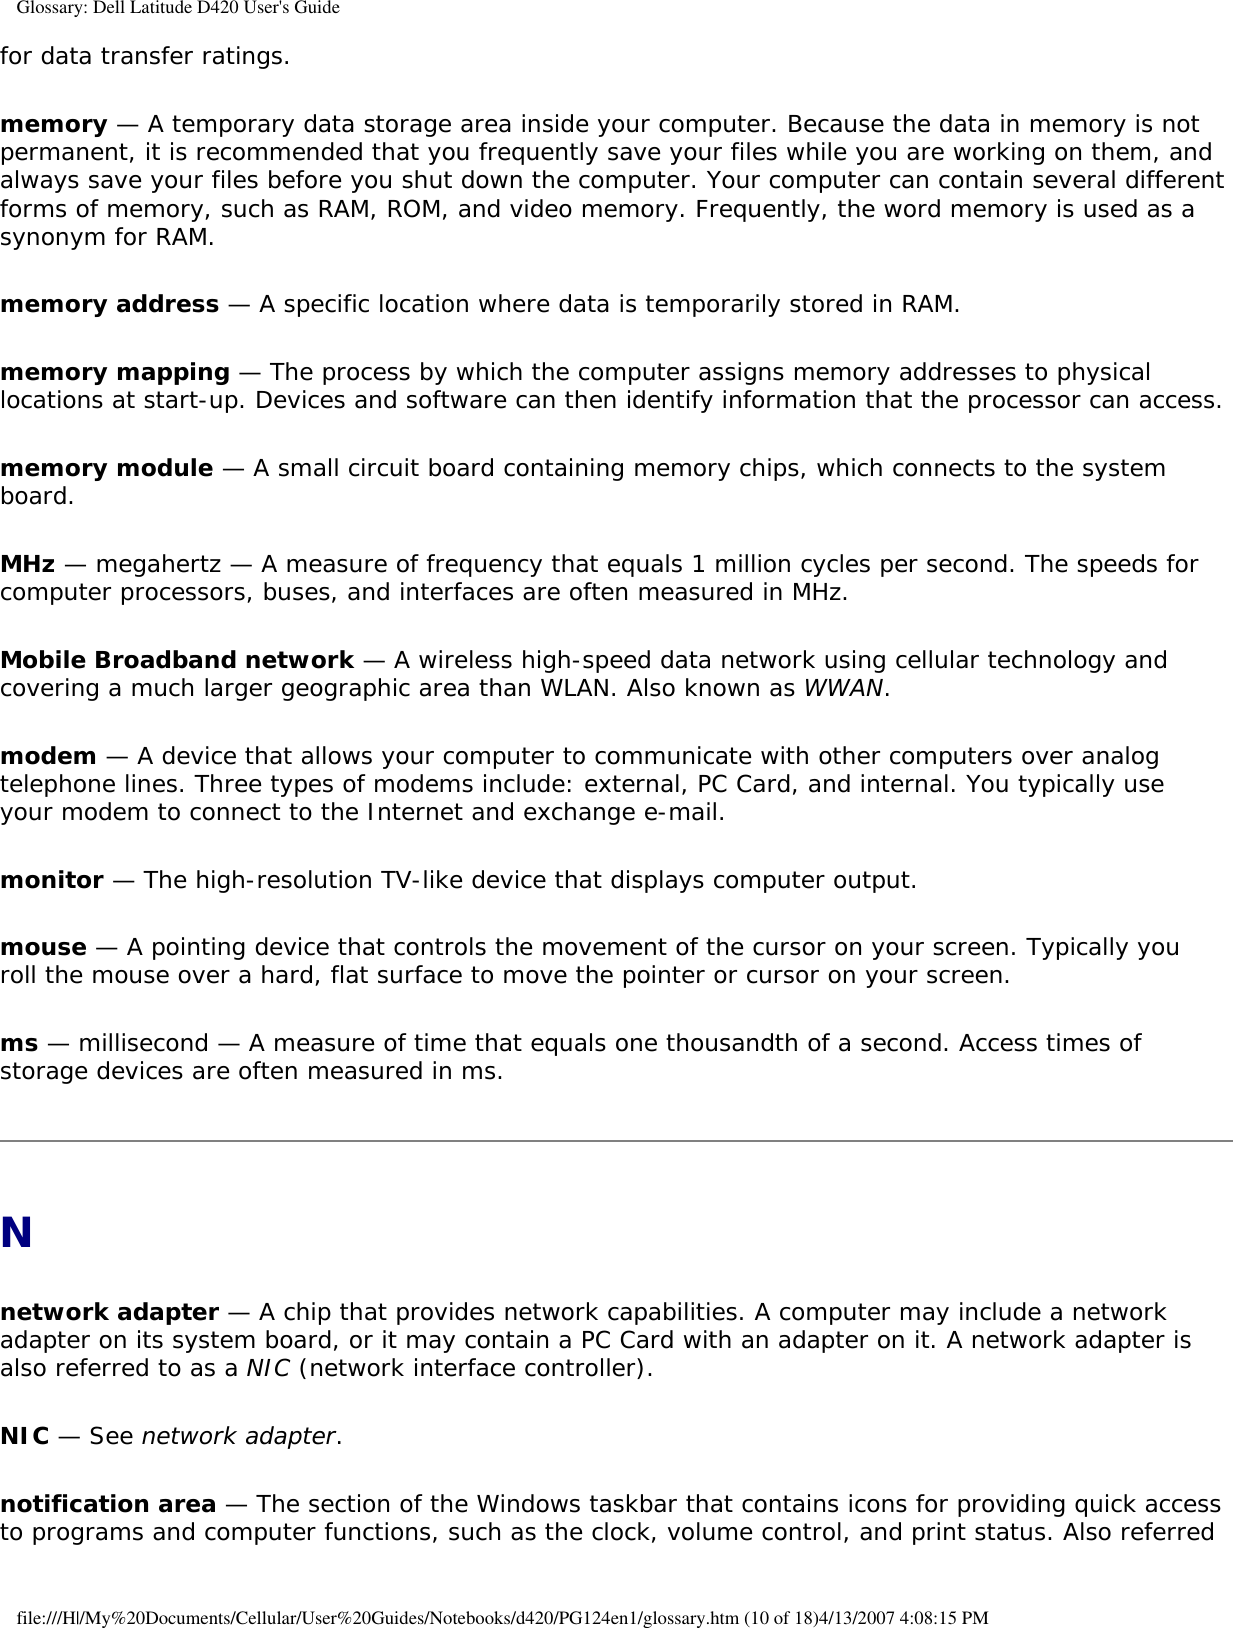 Glossary: Dell Latitude D420 User&apos;s Guidefor data transfer ratings.memory — A temporary data storage area inside your computer. Because the data in memory is not permanent, it is recommended that you frequently save your files while you are working on them, and always save your files before you shut down the computer. Your computer can contain several different forms of memory, such as RAM, ROM, and video memory. Frequently, the word memory is used as a synonym for RAM.memory address — A specific location where data is temporarily stored in RAM.memory mapping — The process by which the computer assigns memory addresses to physical locations at start-up. Devices and software can then identify information that the processor can access.memory module — A small circuit board containing memory chips, which connects to the system board.MHz — megahertz — A measure of frequency that equals 1 million cycles per second. The speeds for computer processors, buses, and interfaces are often measured in MHz.Mobile Broadband network — A wireless high-speed data network using cellular technology and covering a much larger geographic area than WLAN. Also known as WWAN.modem — A device that allows your computer to communicate with other computers over analog telephone lines. Three types of modems include: external, PC Card, and internal. You typically use your modem to connect to the Internet and exchange e-mail.monitor — The high-resolution TV-like device that displays computer output.mouse — A pointing device that controls the movement of the cursor on your screen. Typically you roll the mouse over a hard, flat surface to move the pointer or cursor on your screen.ms — millisecond — A measure of time that equals one thousandth of a second. Access times of storage devices are often measured in ms.Nnetwork adapter — A chip that provides network capabilities. A computer may include a network adapter on its system board, or it may contain a PC Card with an adapter on it. A network adapter is also referred to as a NIC (network interface controller).NIC — See network adapter.notification area — The section of the Windows taskbar that contains icons for providing quick access to programs and computer functions, such as the clock, volume control, and print status. Also referred file:///H|/My%20Documents/Cellular/User%20Guides/Notebooks/d420/PG124en1/glossary.htm (10 of 18)4/13/2007 4:08:15 PM